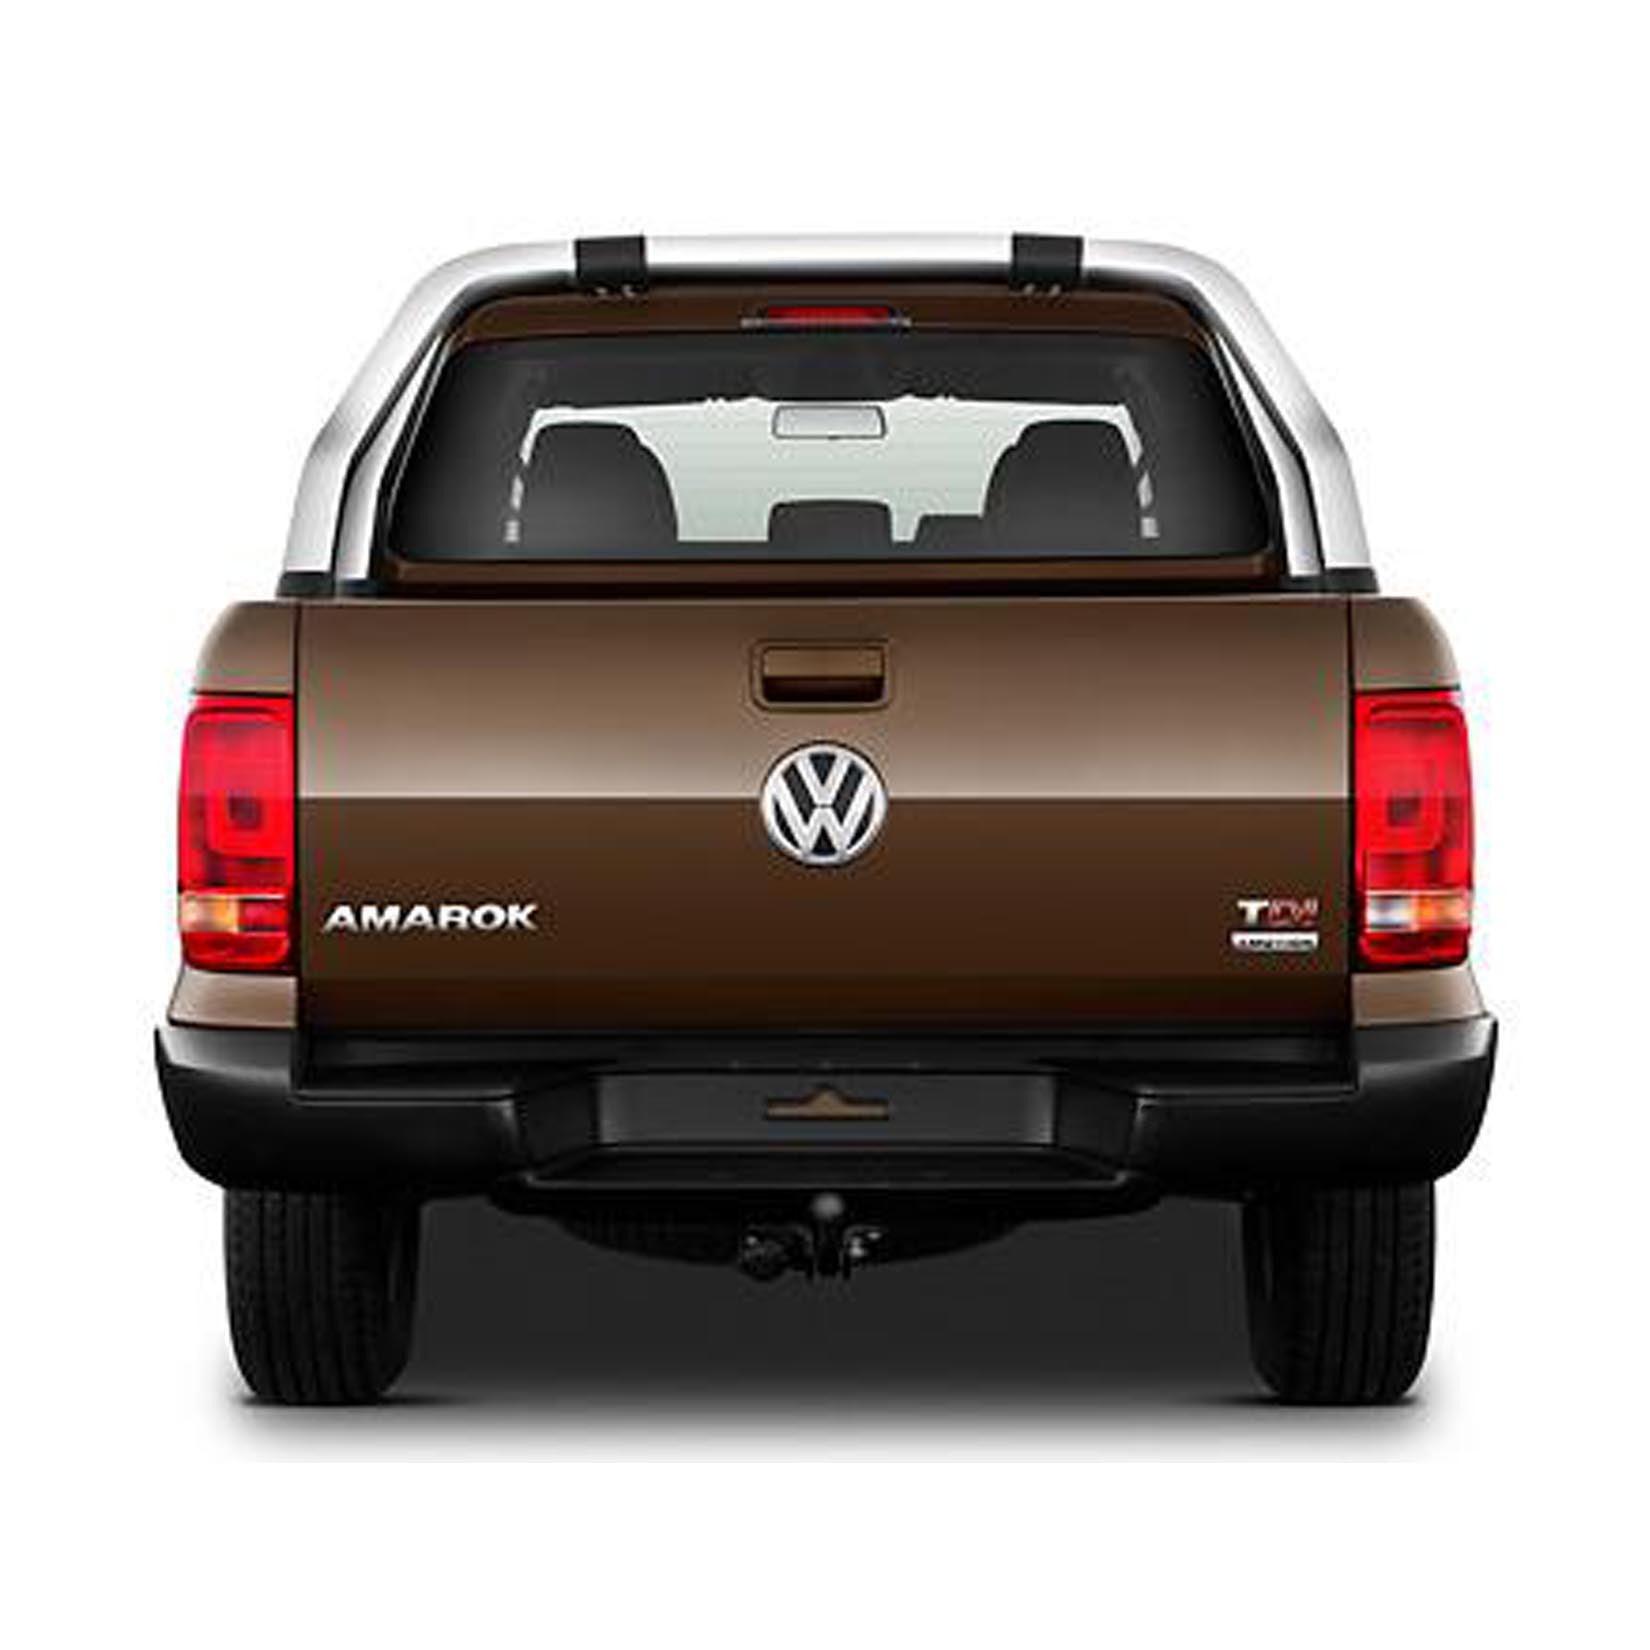 VW AMAROK 2010-2021 REPLACEMENT REAR BUMPER IN BLACK WITH SENSOR HOLES - Storm Xccessories2